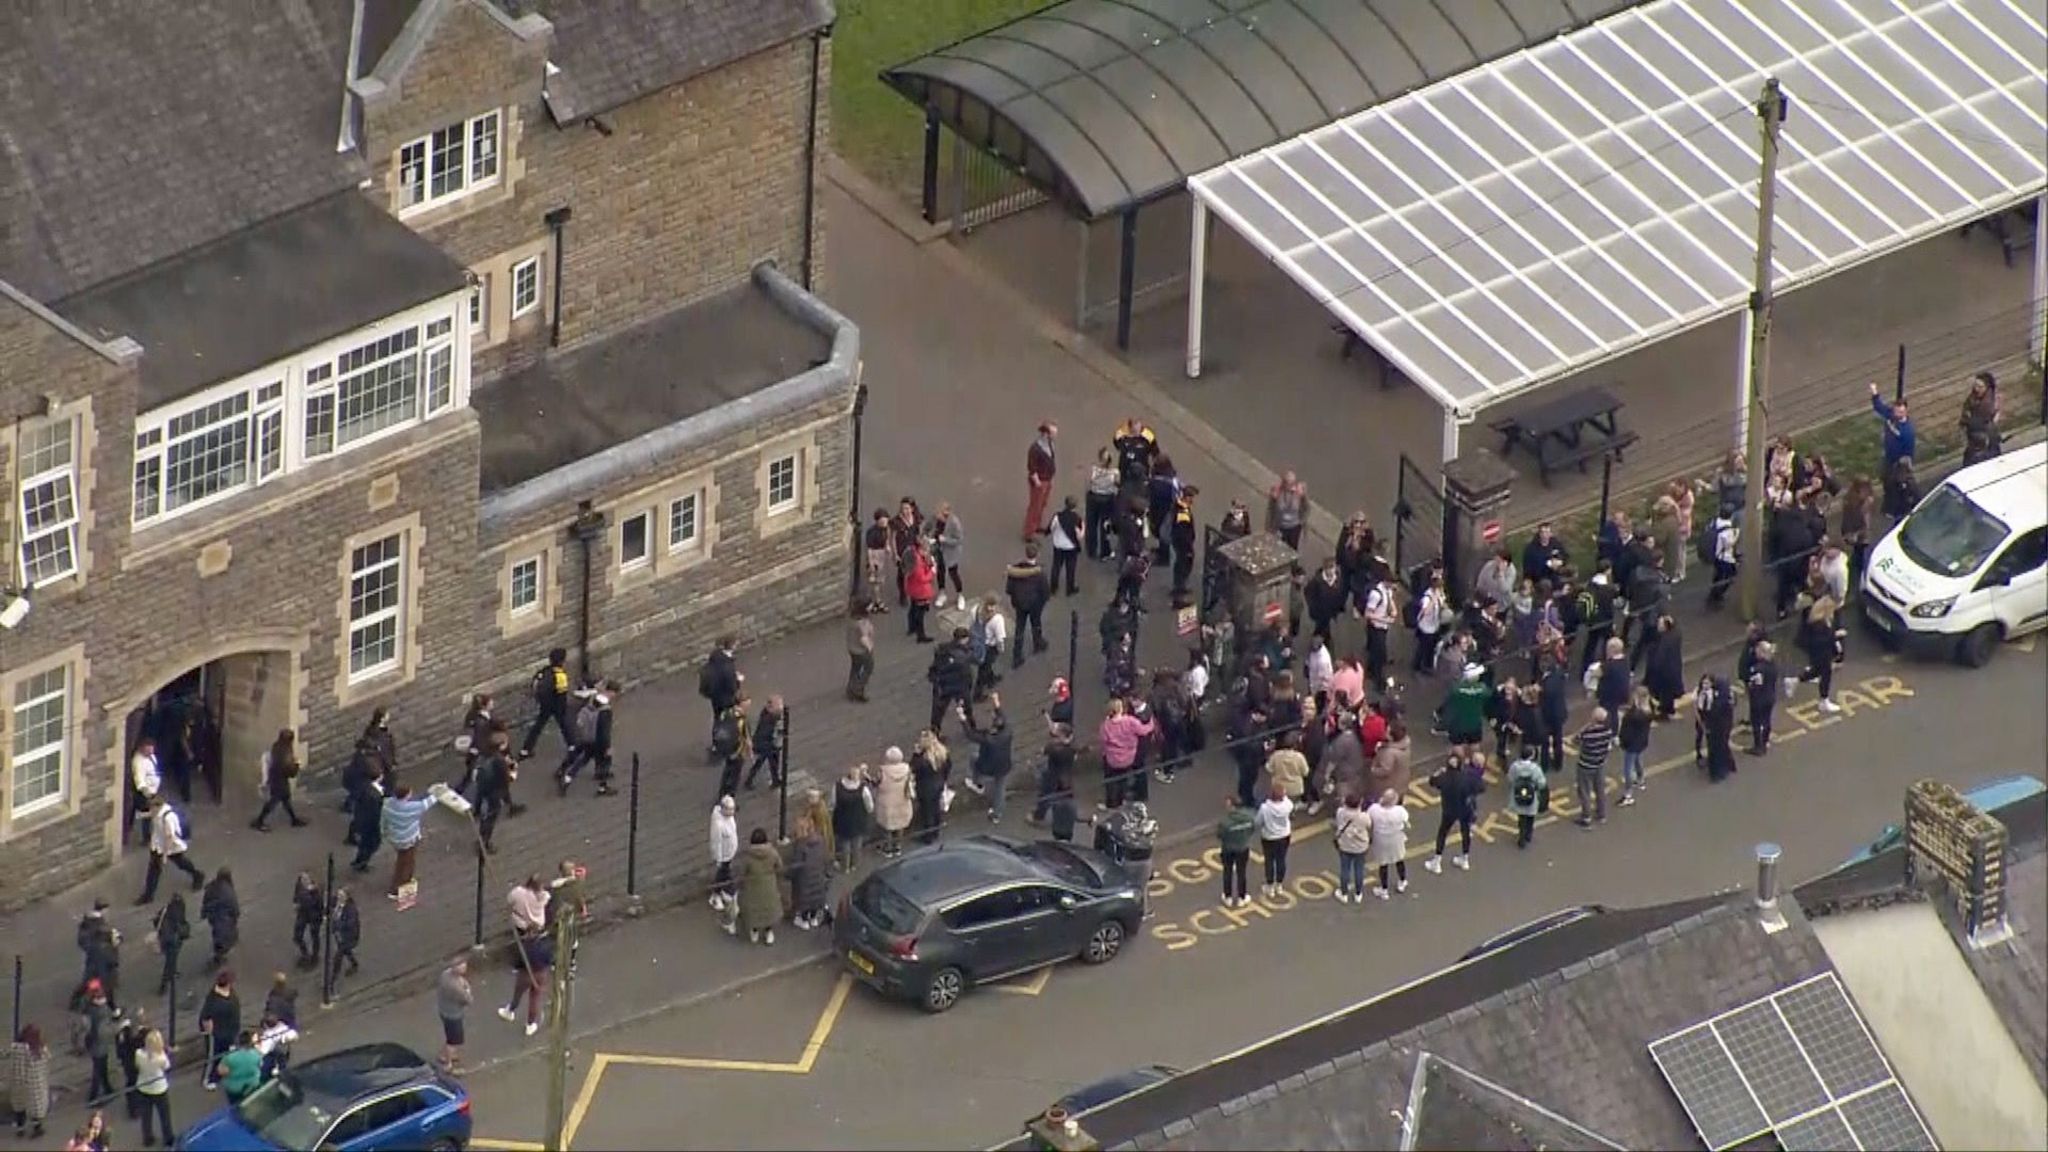 Lines of children leaving the school after the lockdown ended